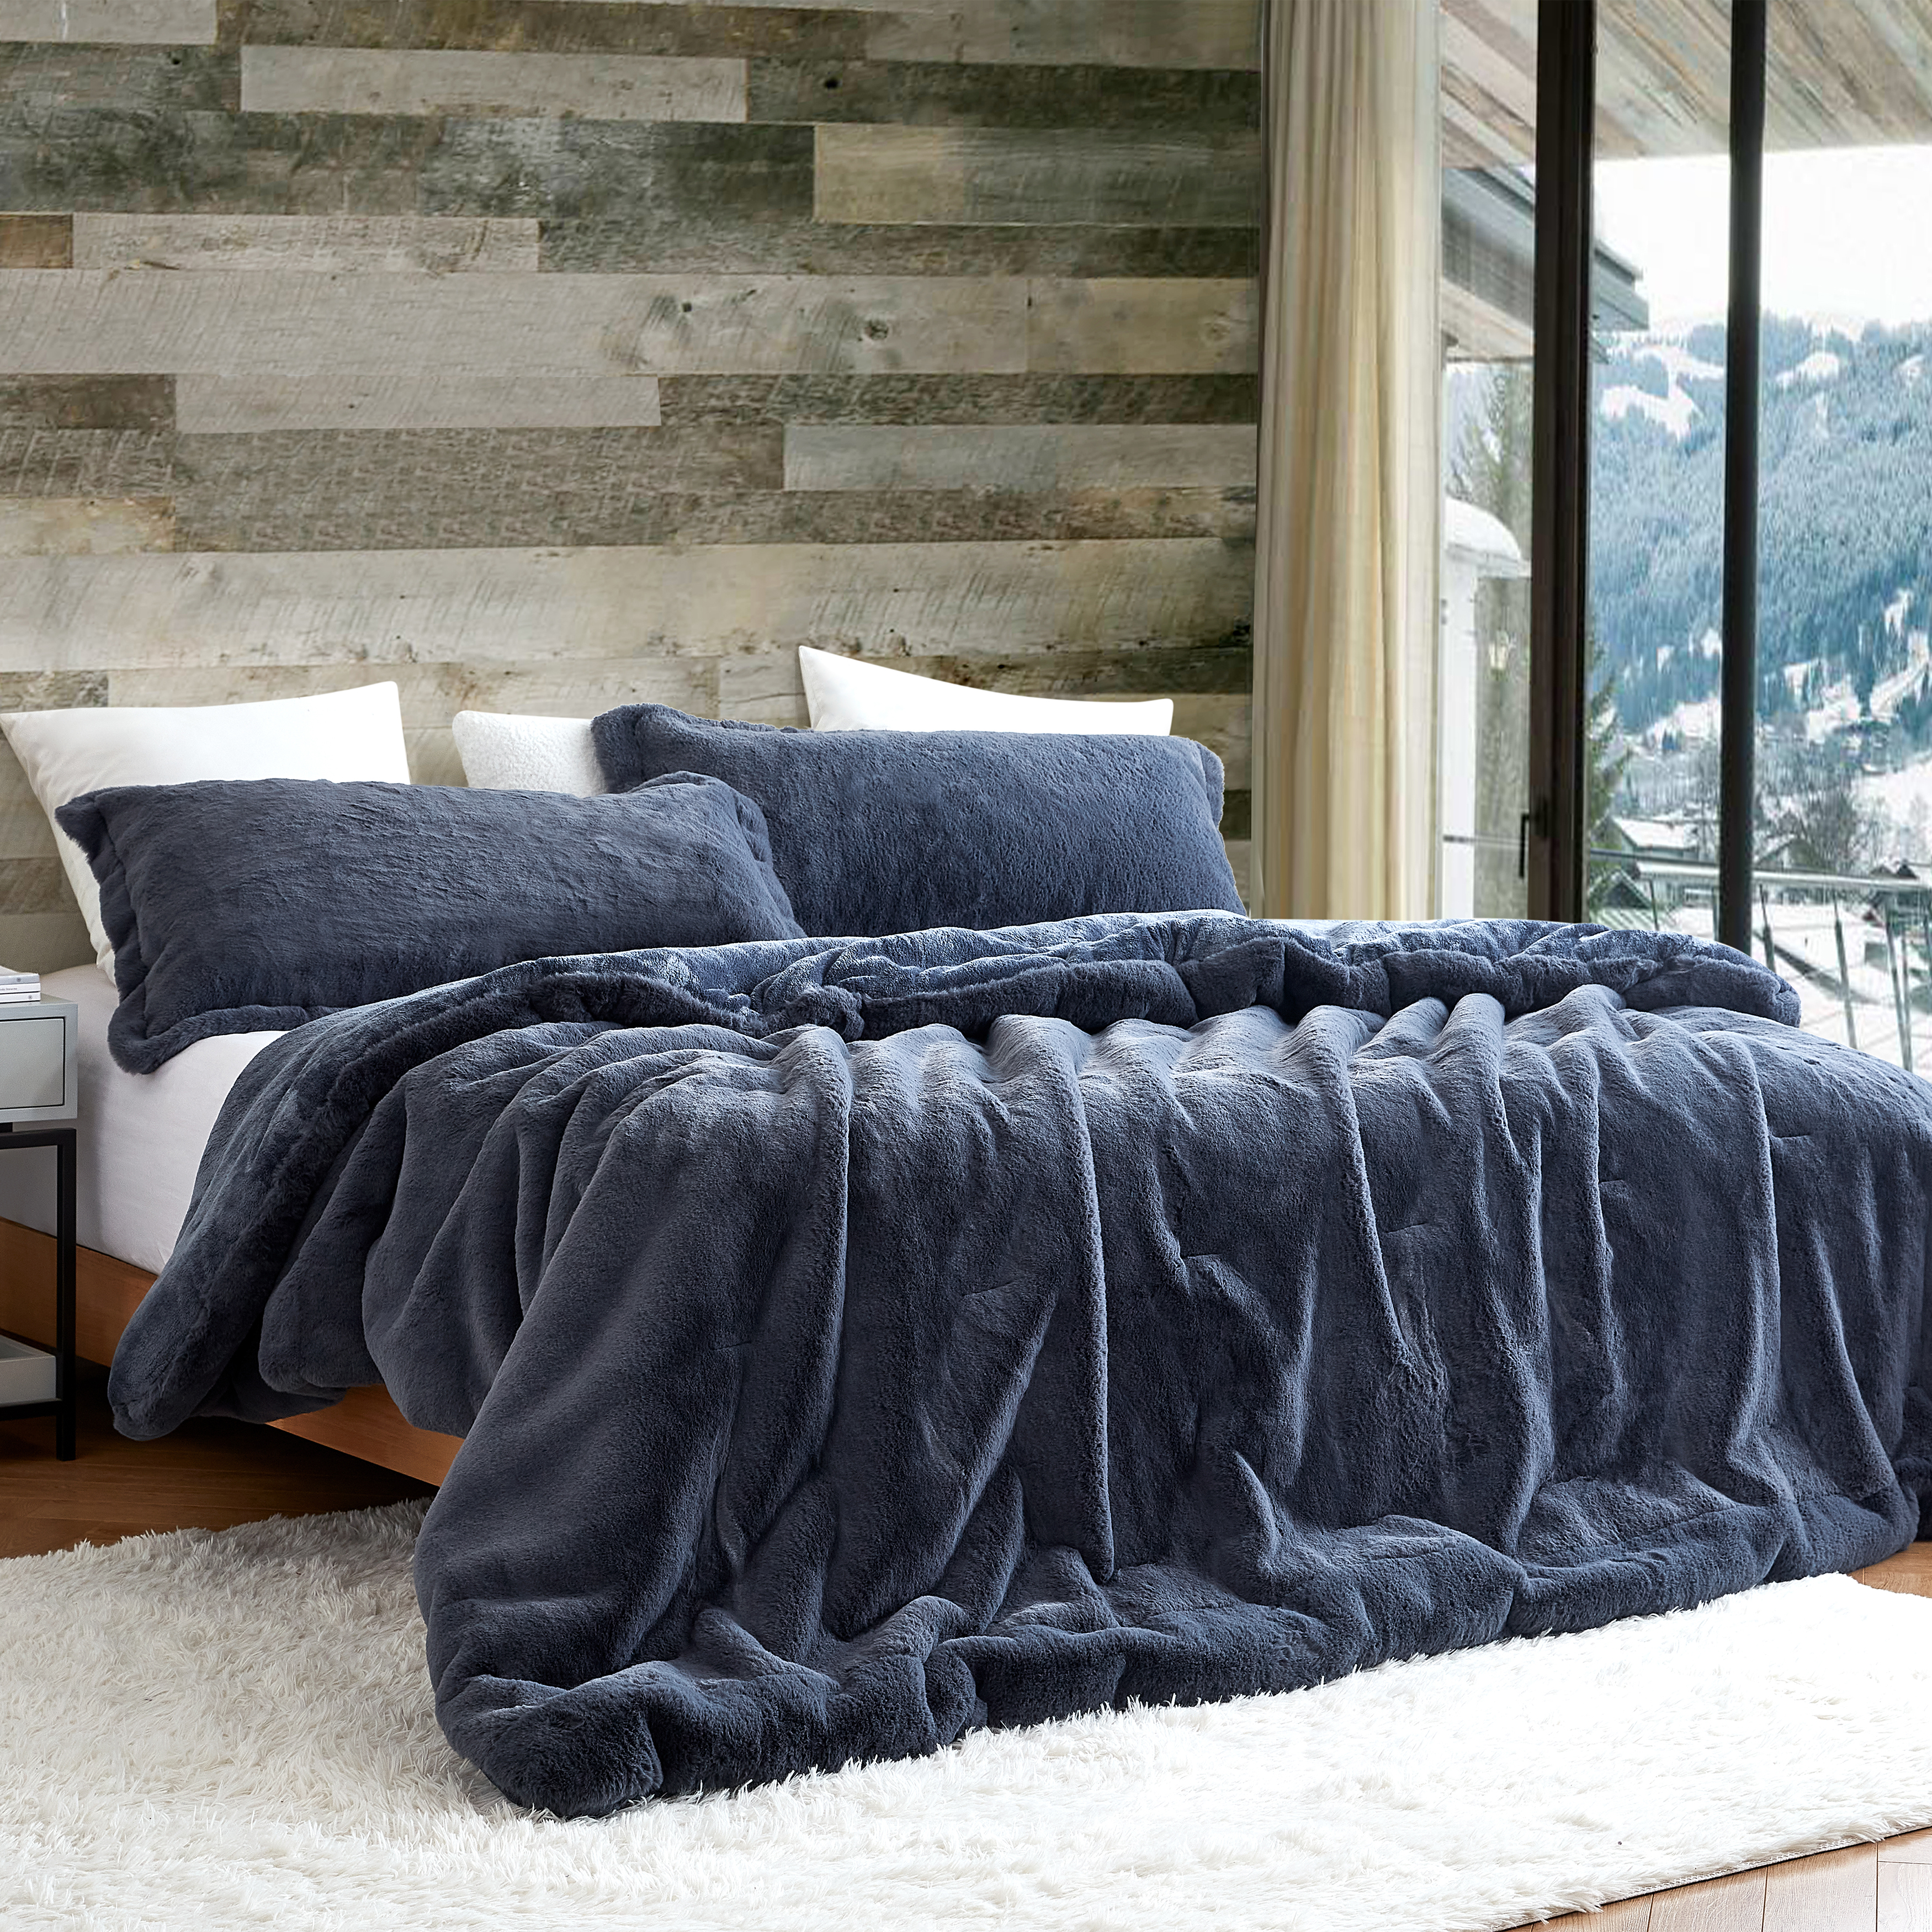 Chunky Bunny - Coma Inducer Oversized King Comforter - Blue Steel